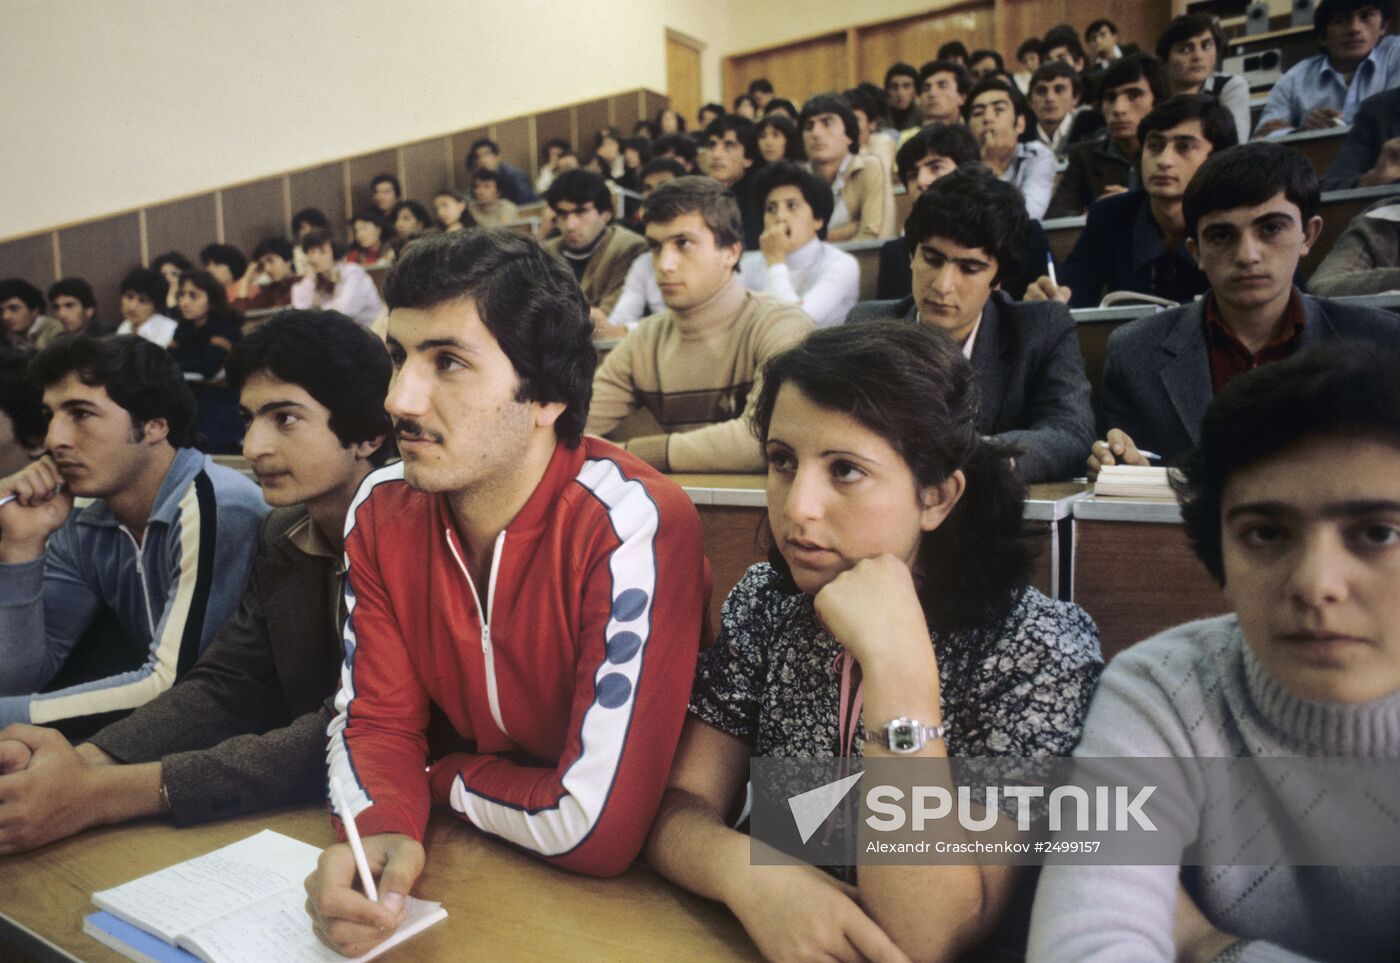 Students at lecture